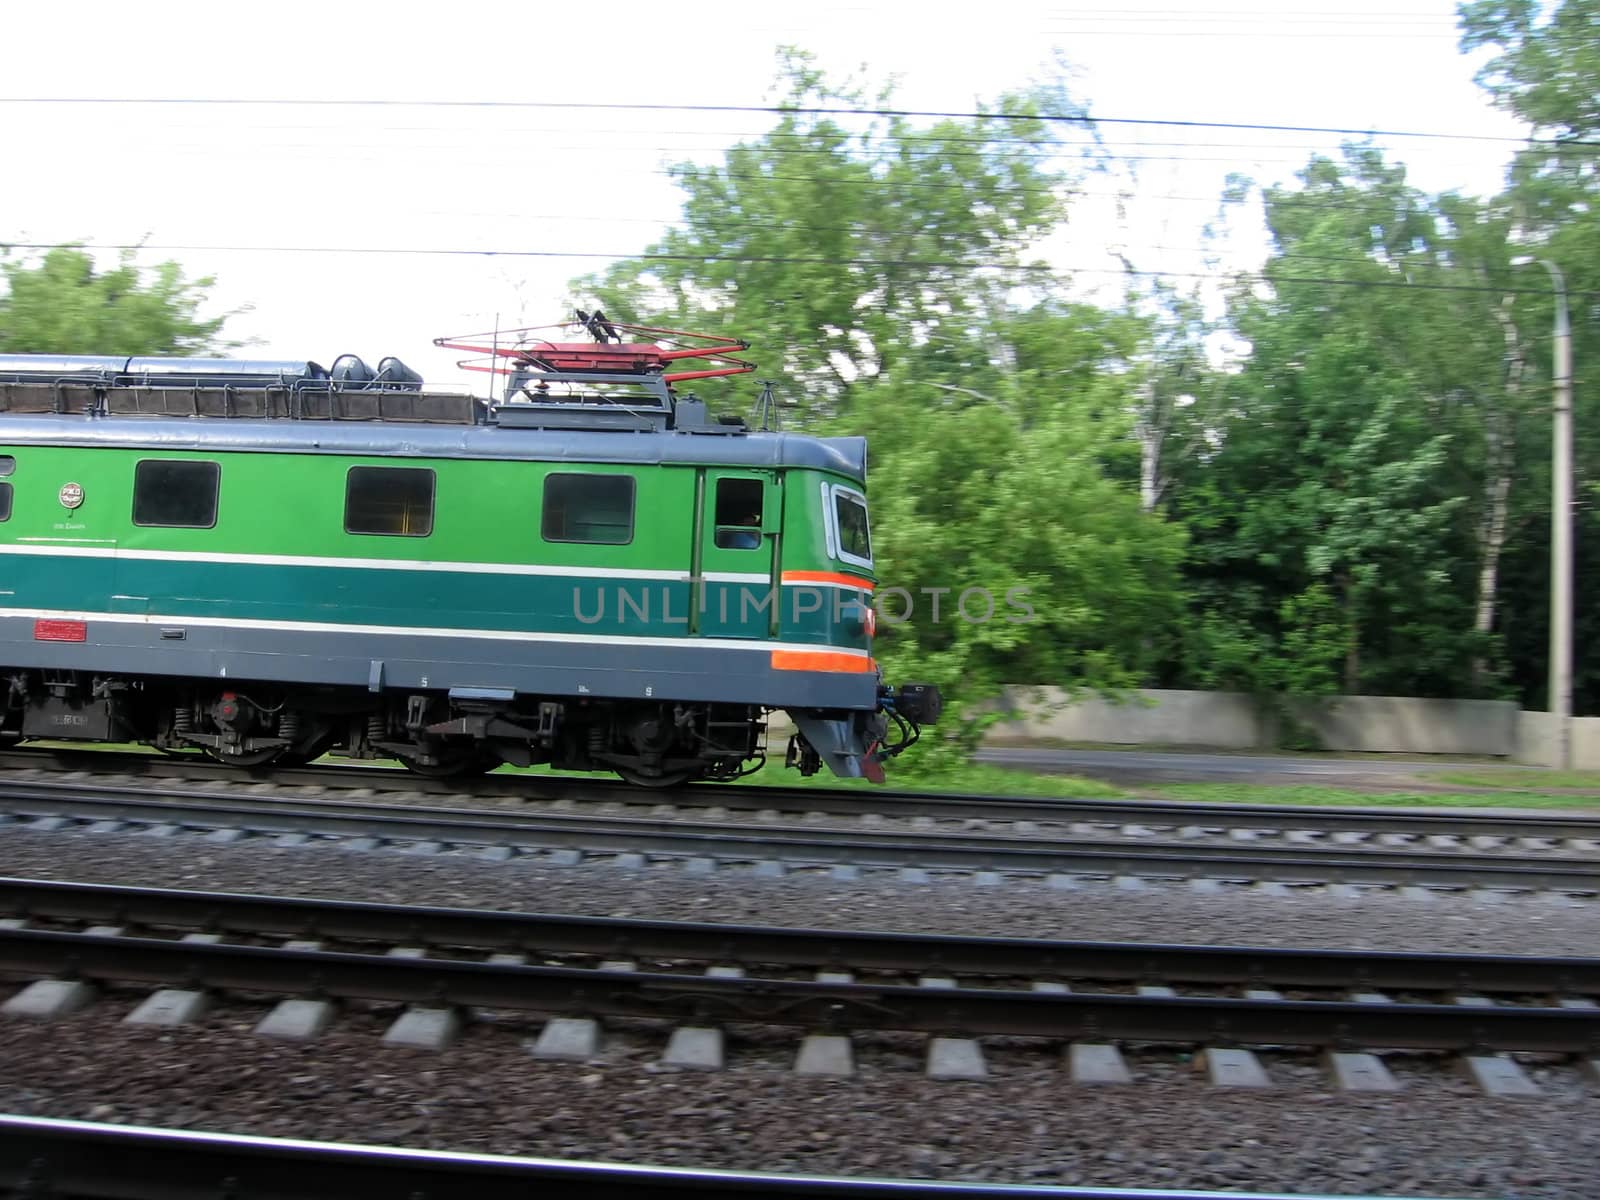 Green fast Russian locomotive moves through wood